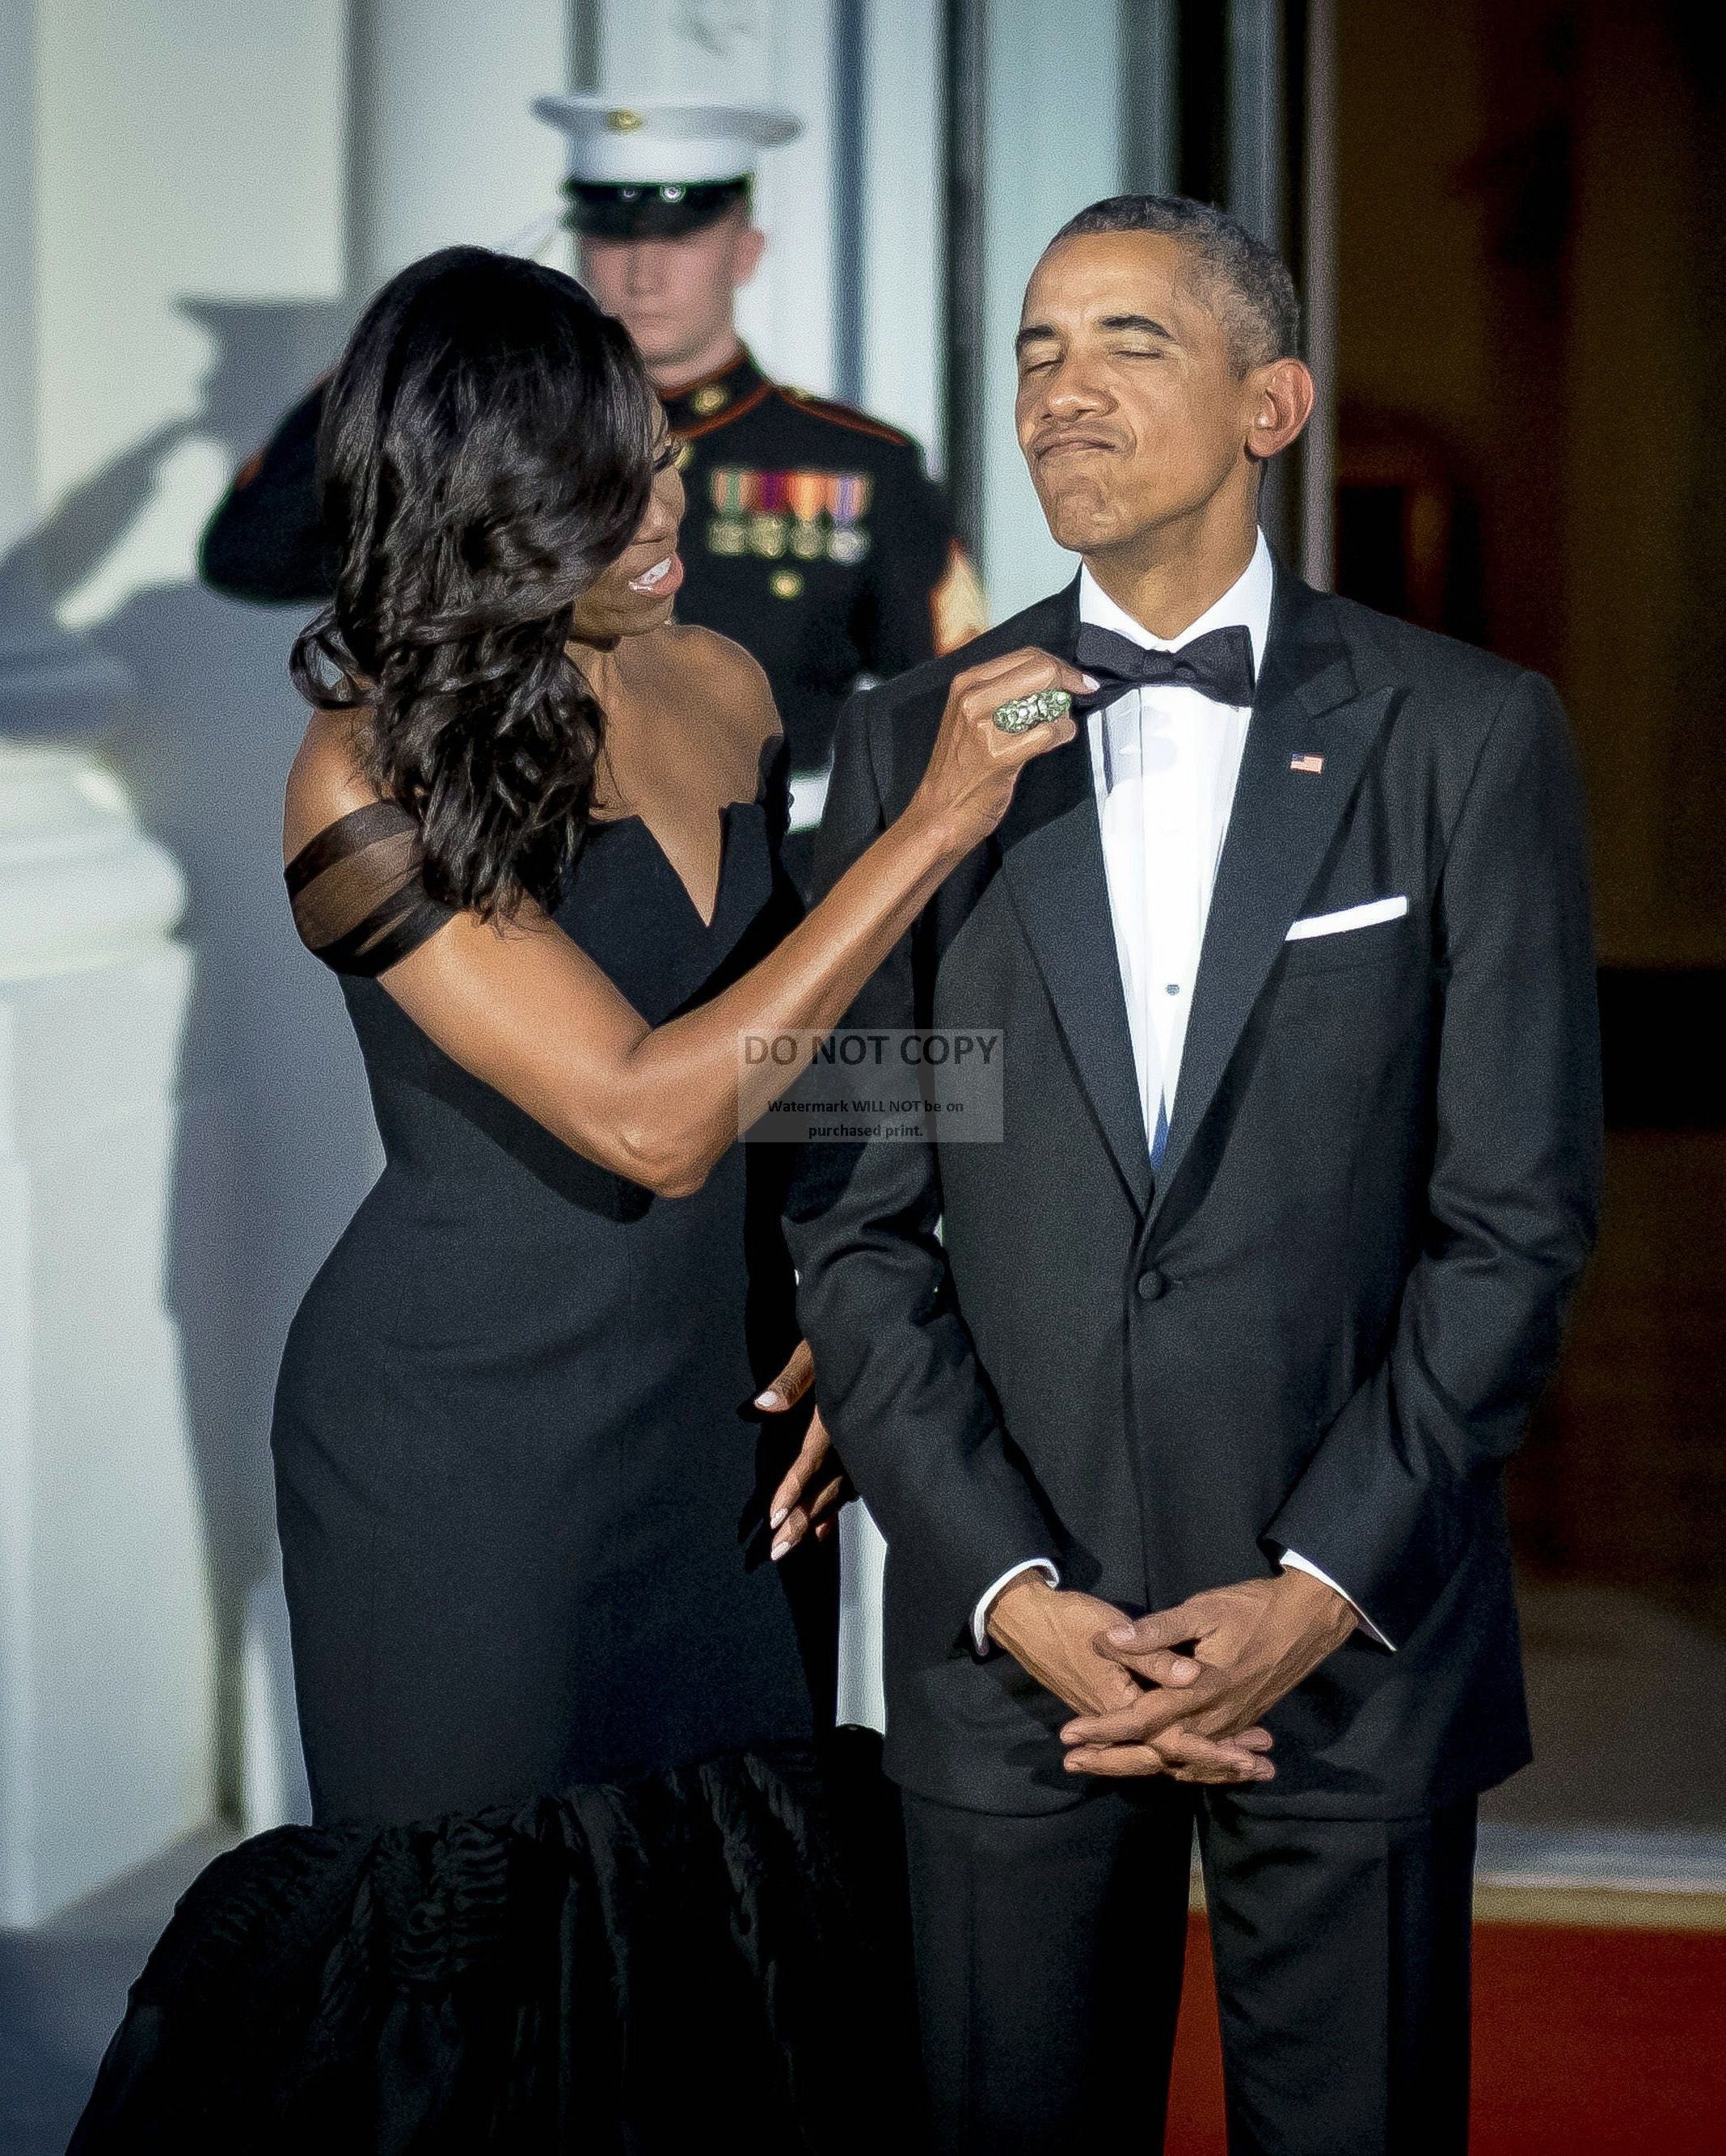 President Barack Obama and First Lady Michelle Obama Prior to picture